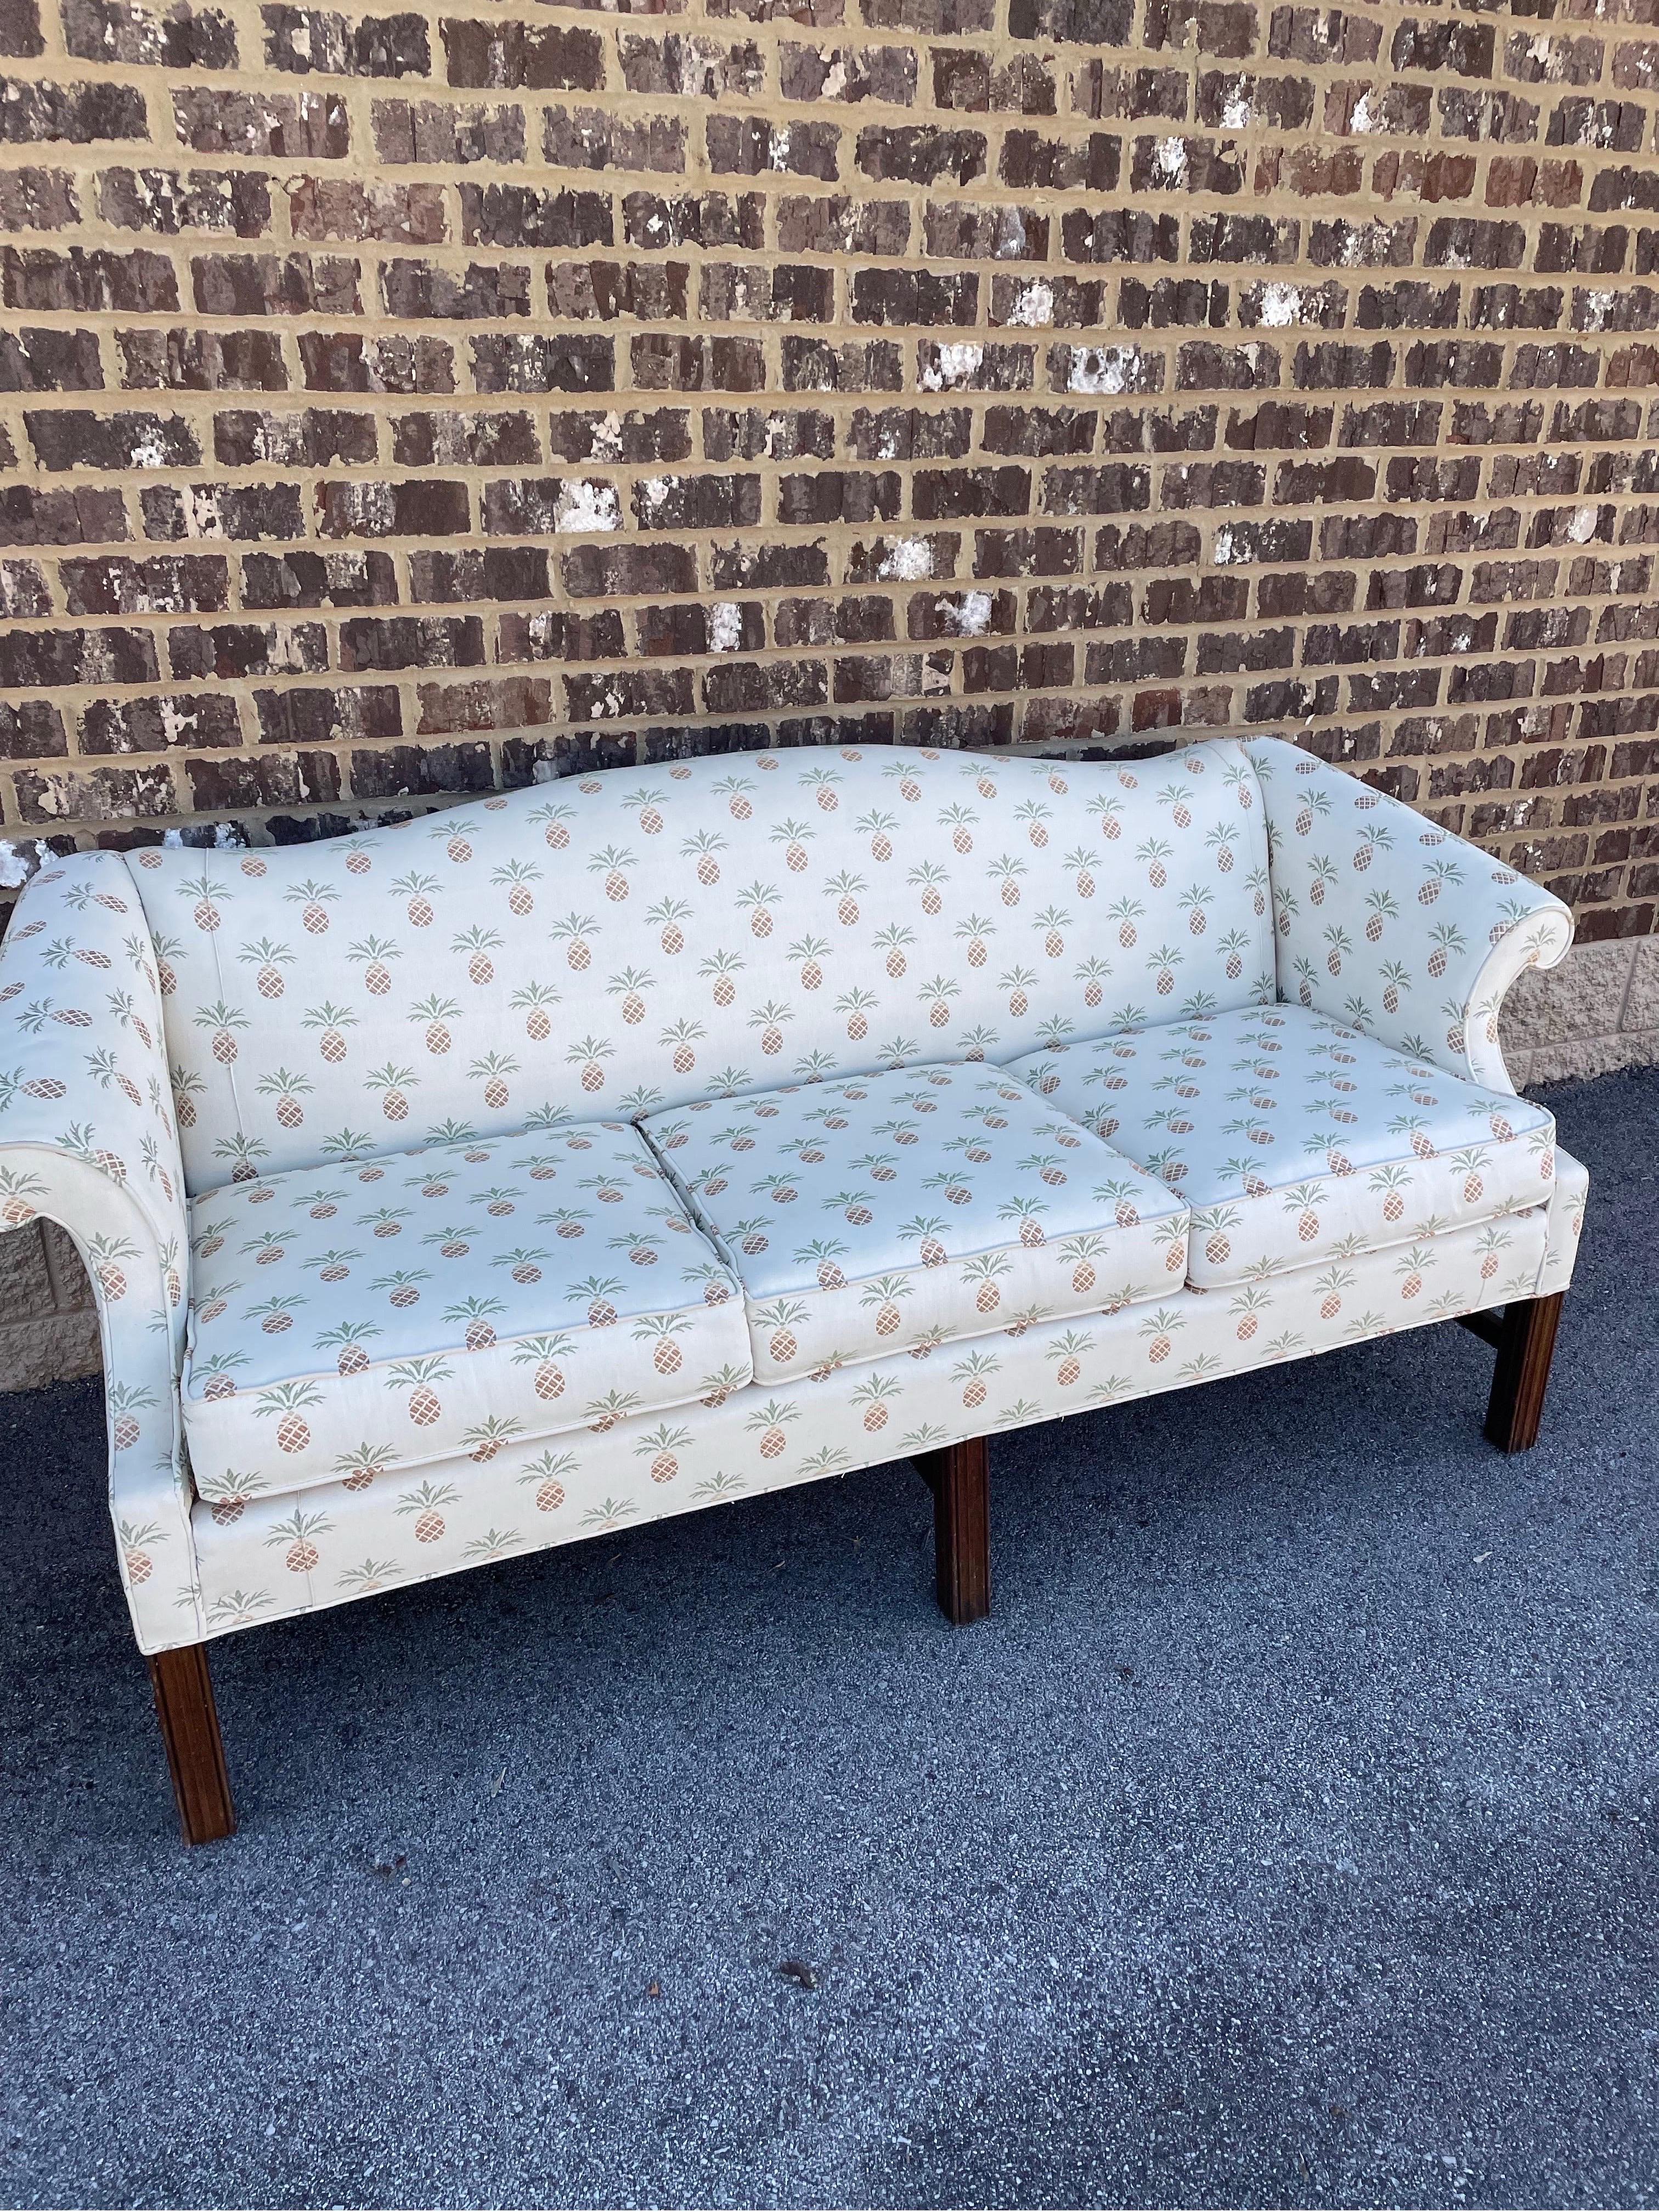 Lovely Chippendale style loveseat/settee with gorgeous pineapple upholstery, by Stateville and Ross of North Carolina. wood is beautiful and in great condition. The fabric is also in good overall condition.

The sofa features superior workmanship --